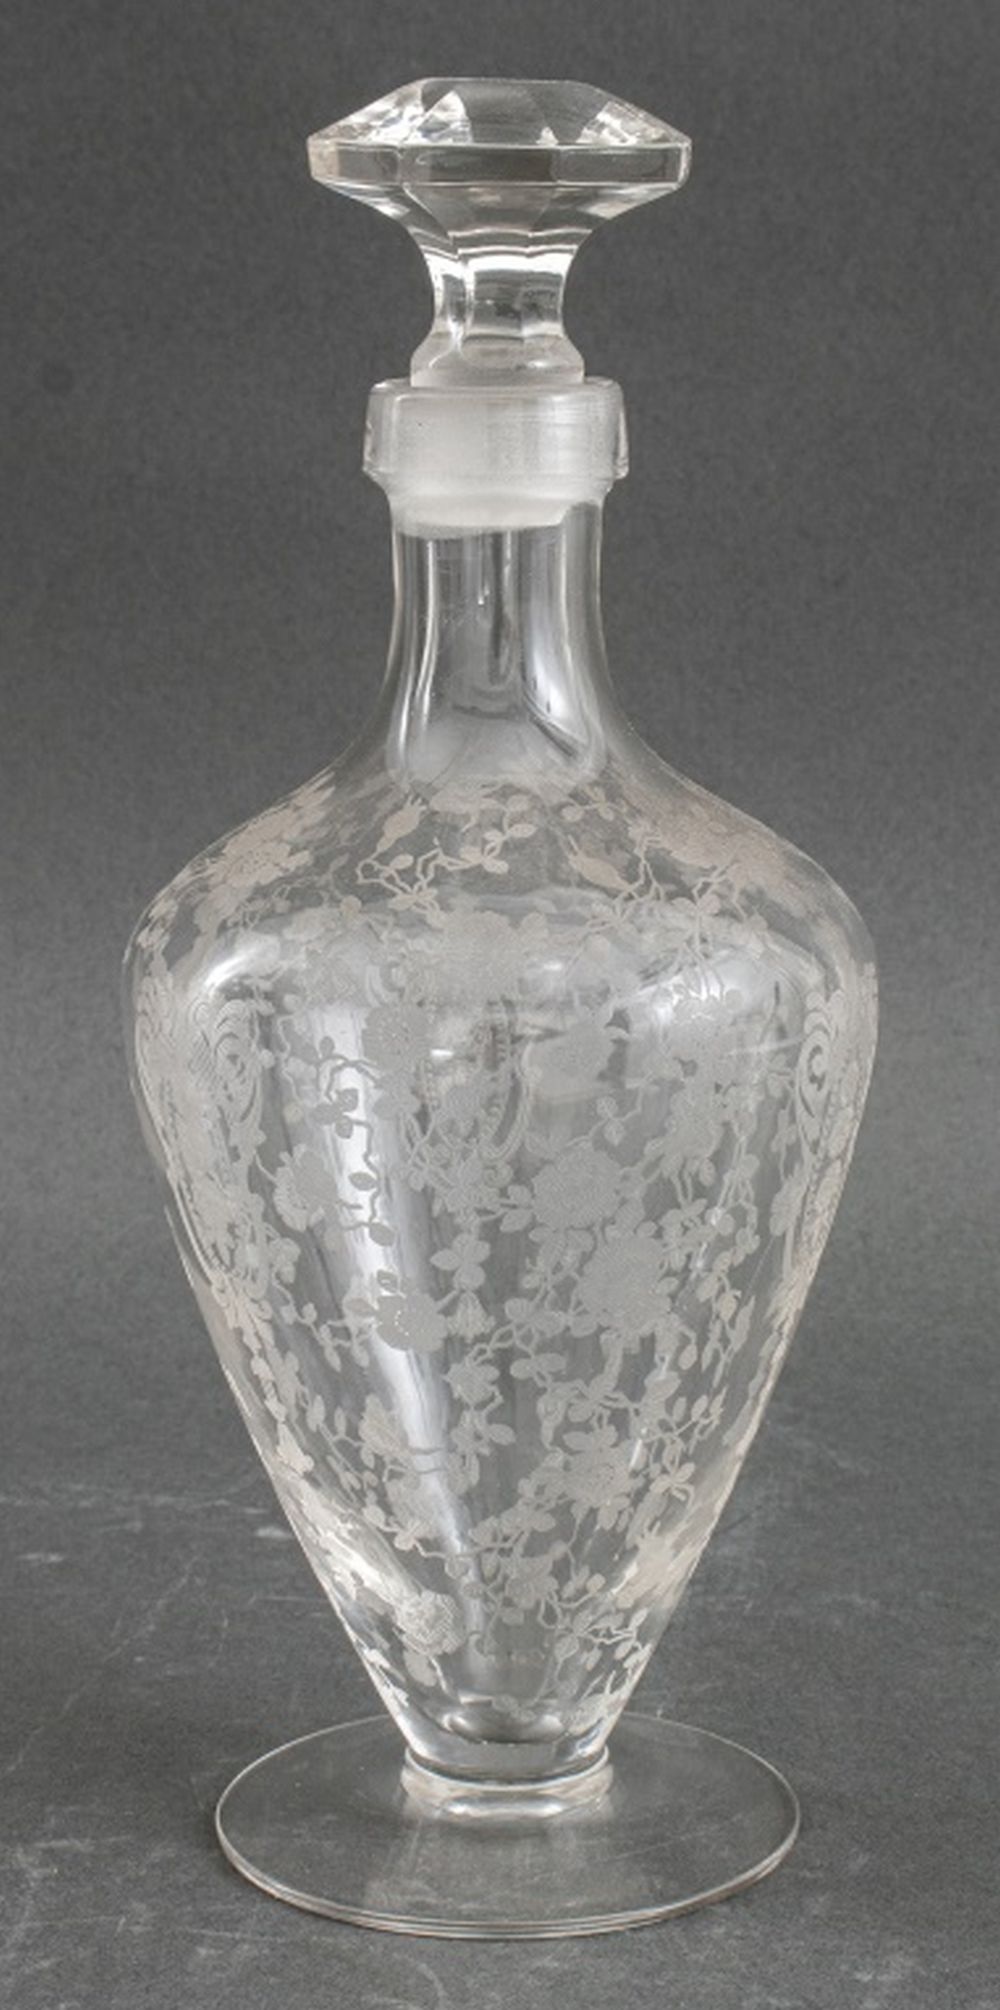 CLEAR AND FROSTED GLASS DECANTER 2bbf27